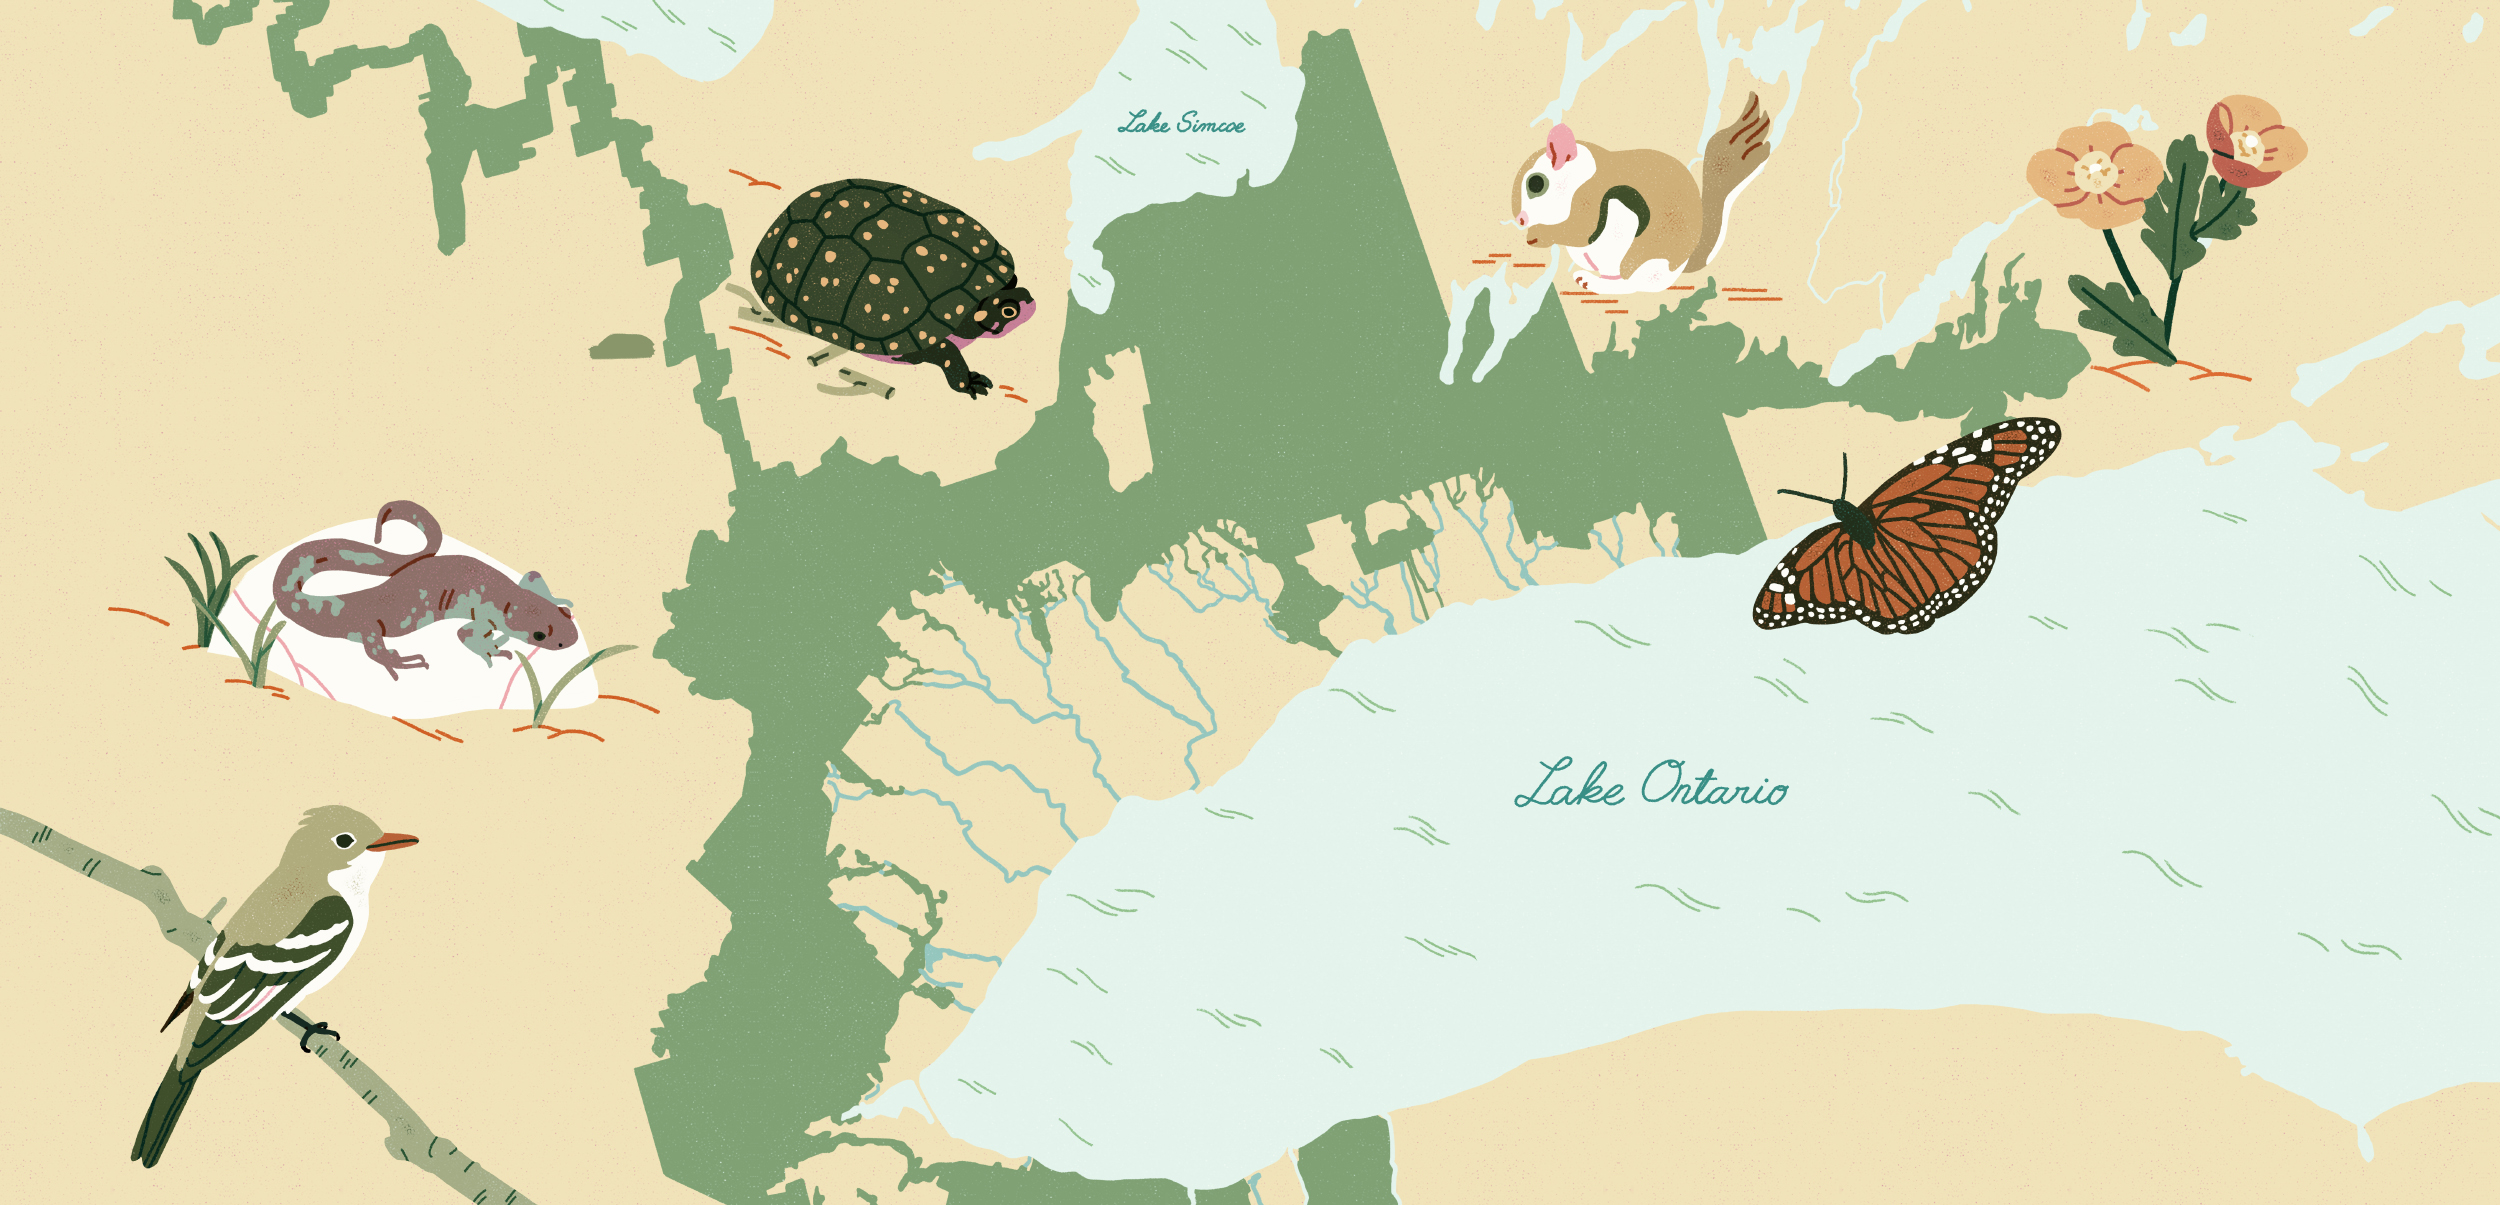 An illustrated image of Ontario's Greenbelt with animals and plants